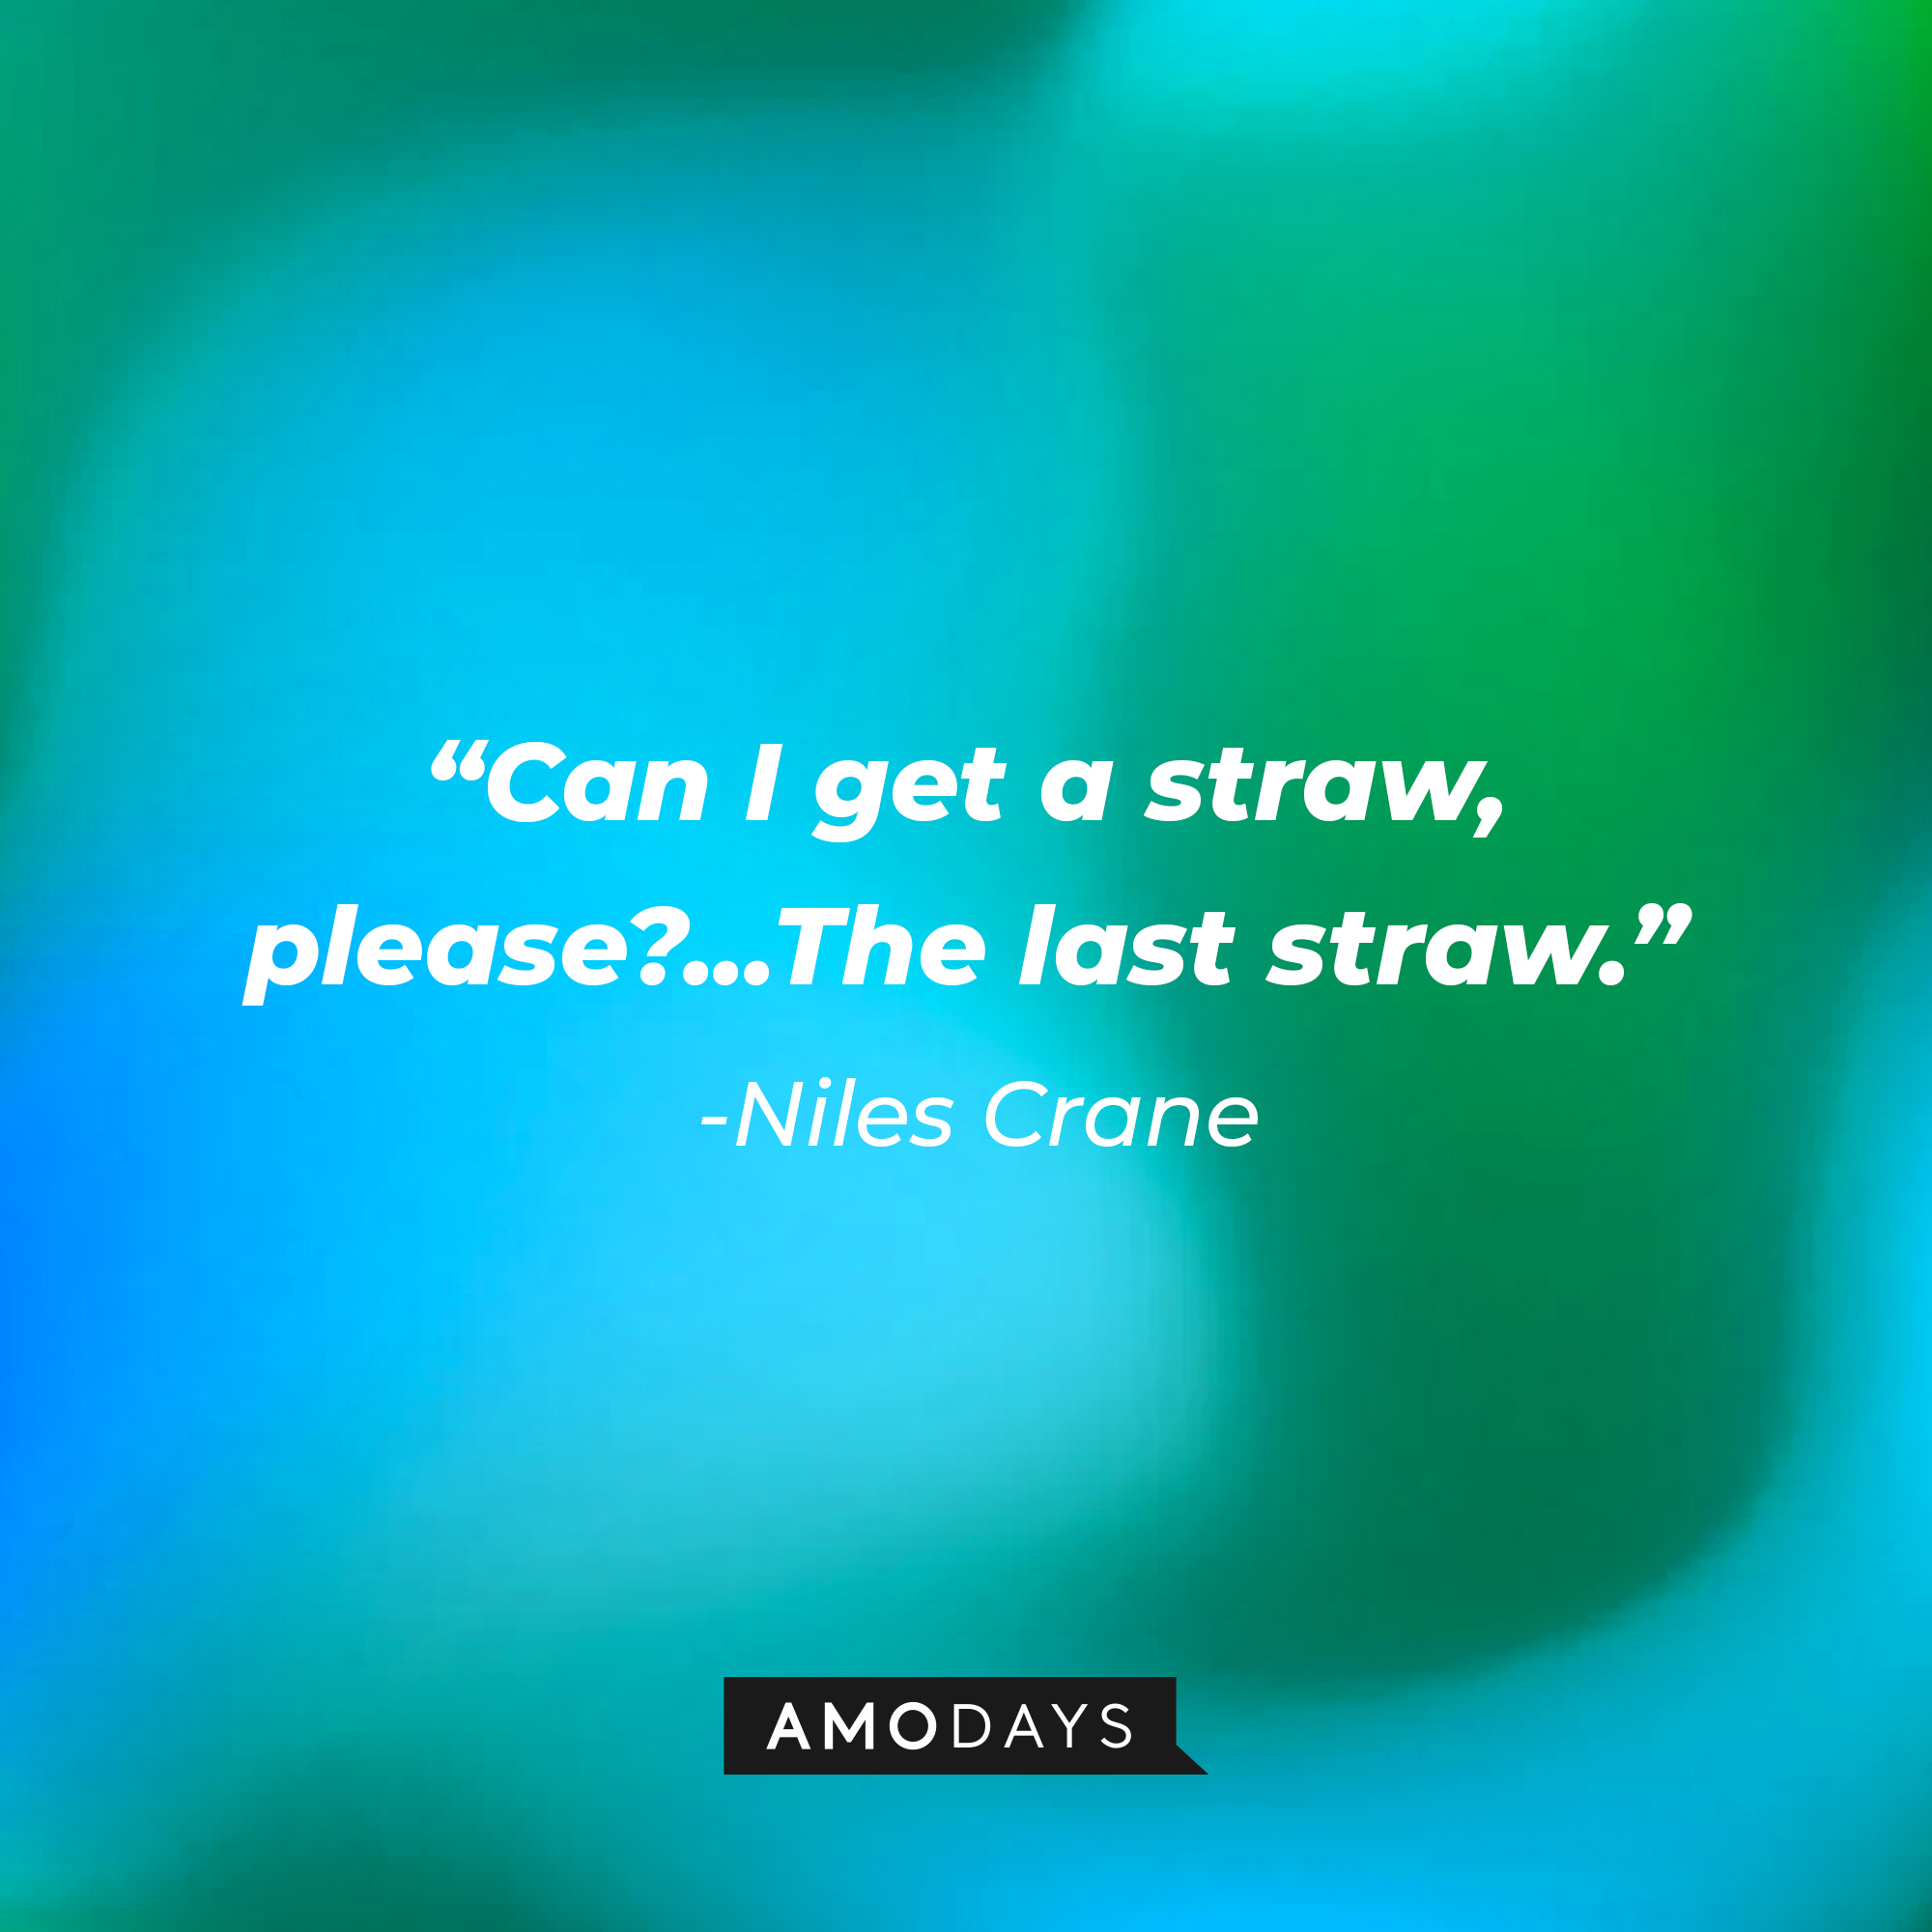 Niles Crane’s quote: “Can I get a straw, please?...The last straw.” | Source: AmoDays